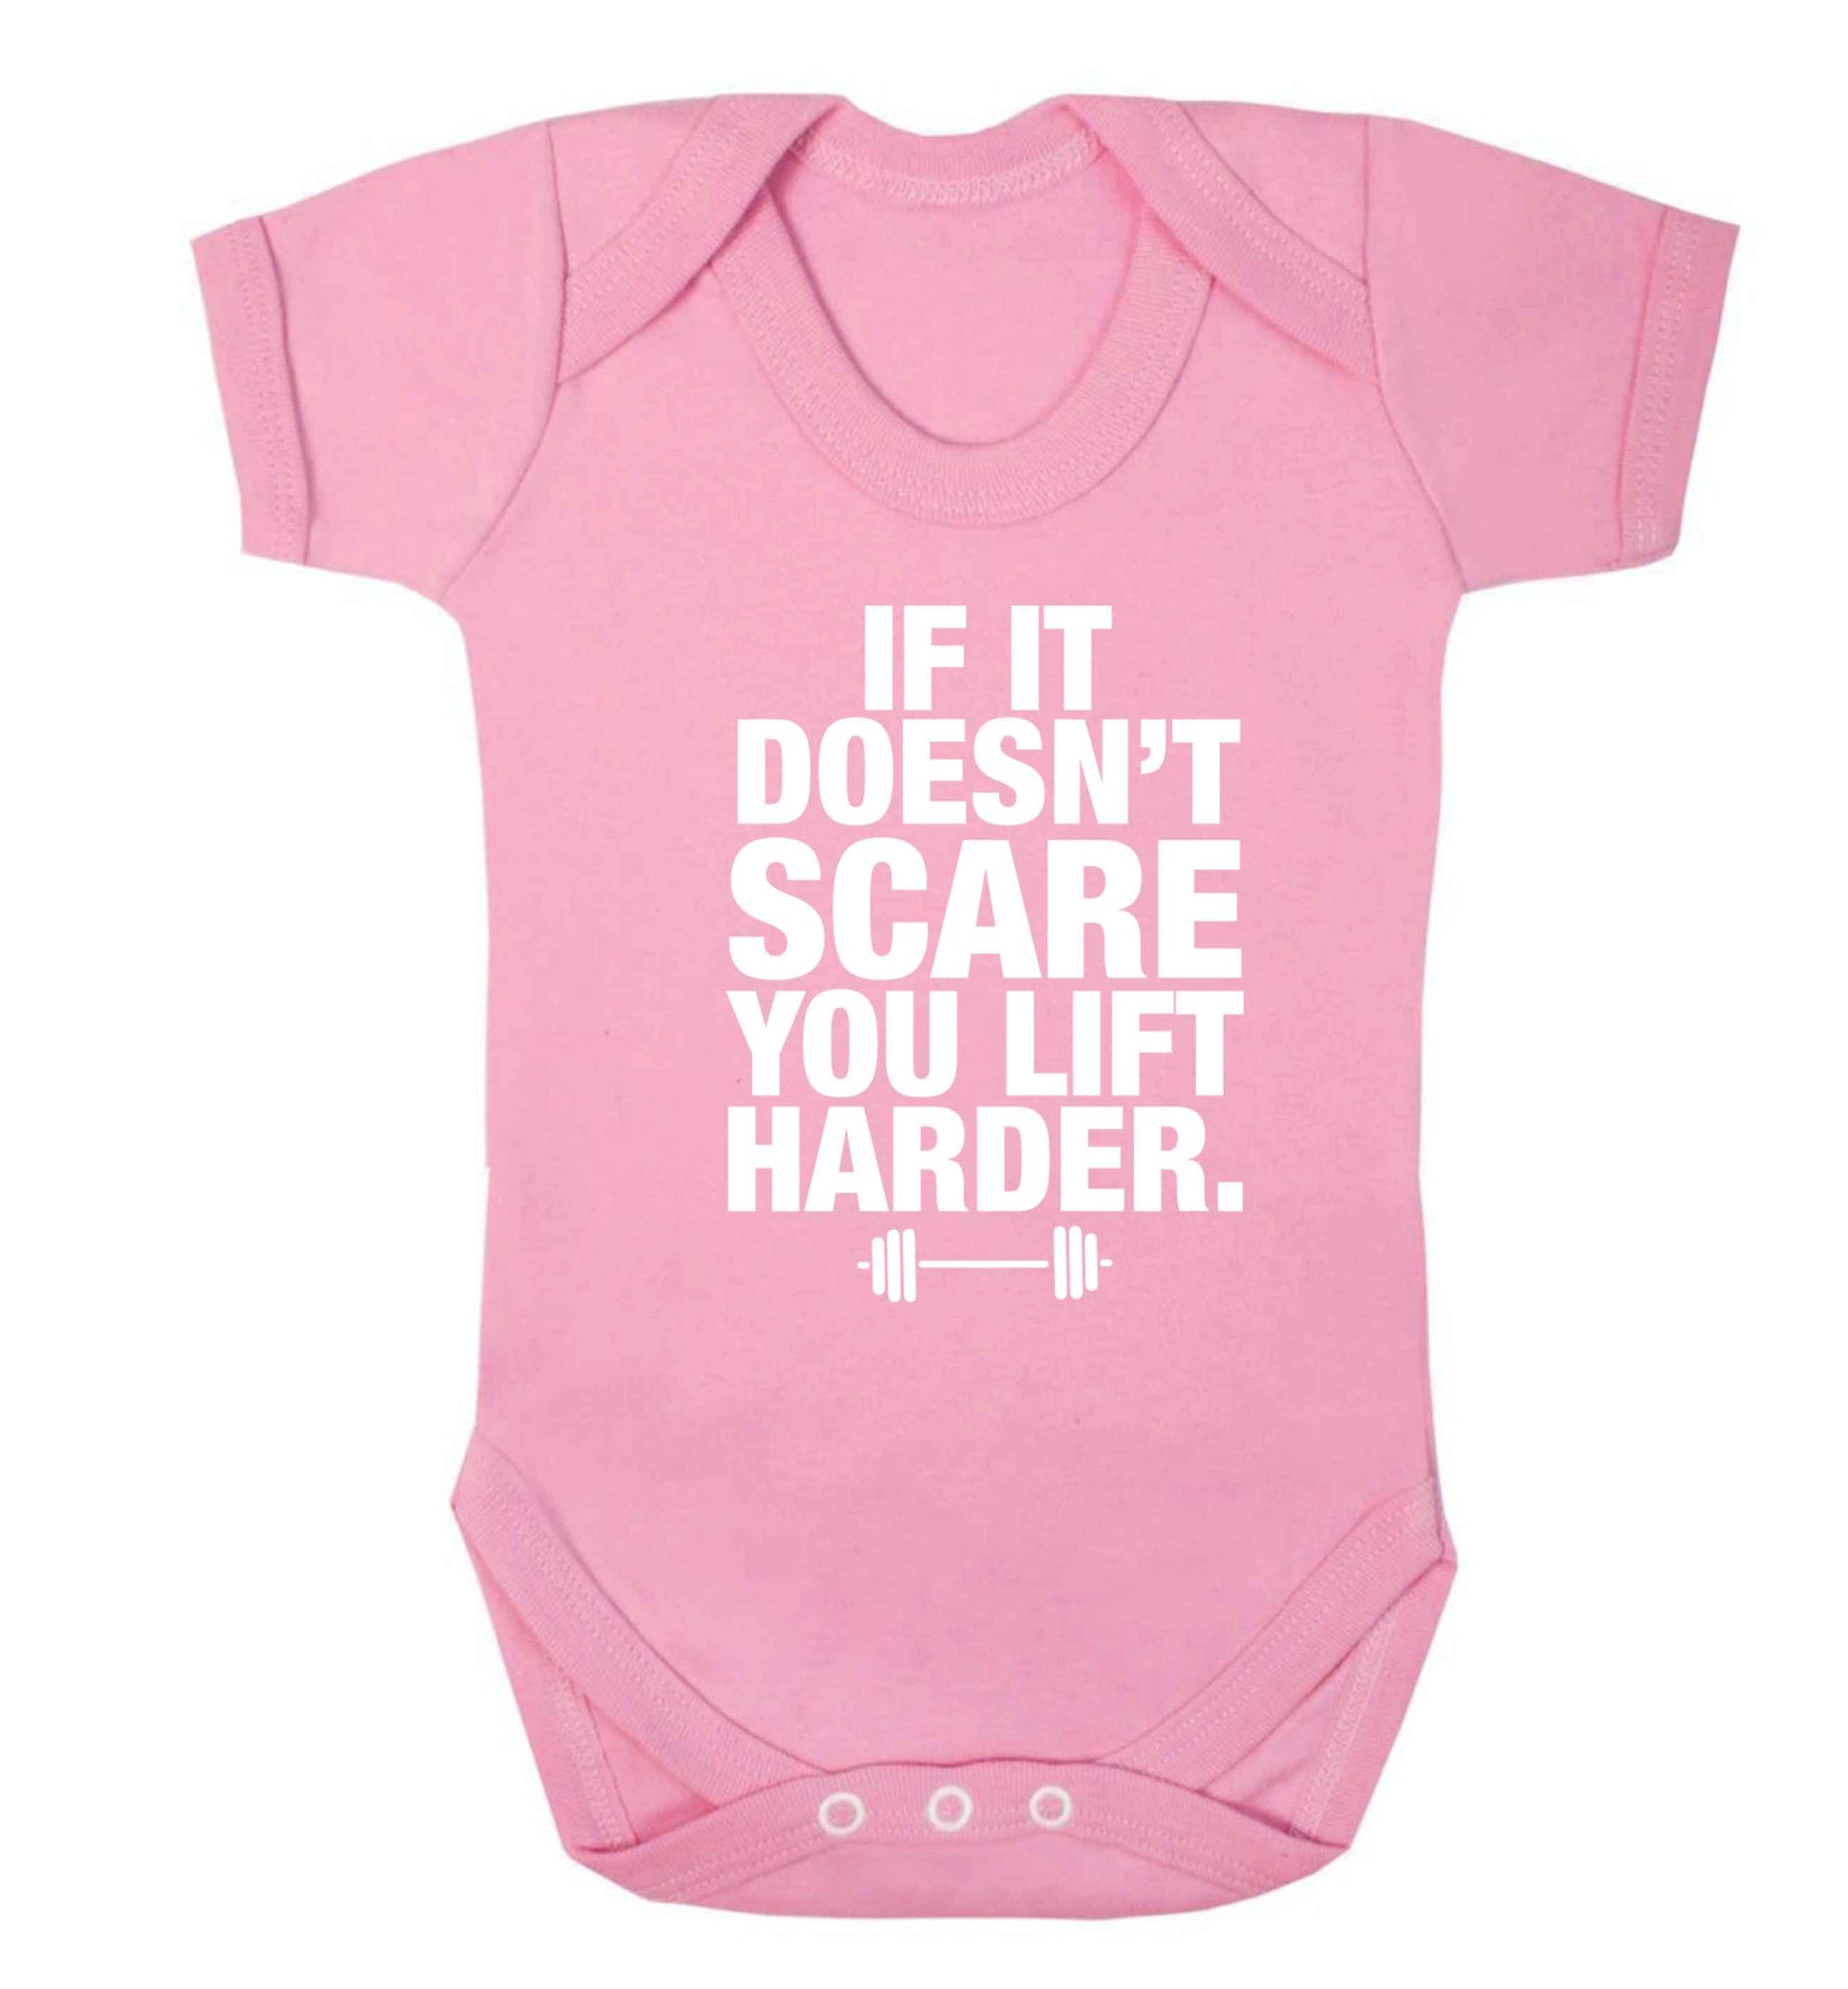 If it doesnt' scare you lift harder Baby Vest pale pink 18-24 months